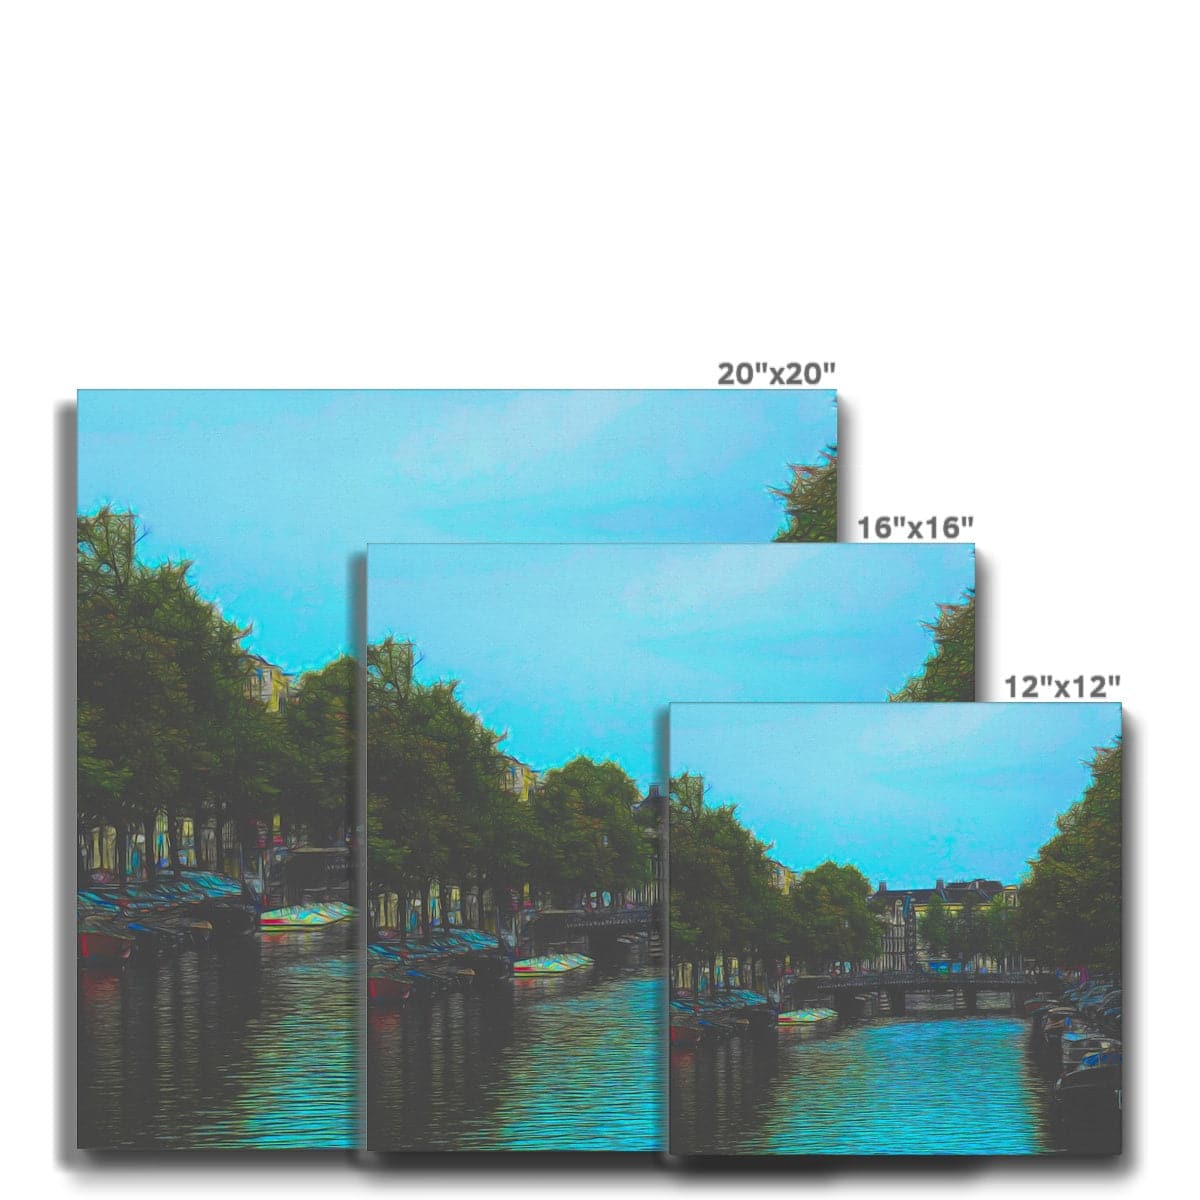 Amsterdam Canal, Art on Canvas, by Sensus Studio